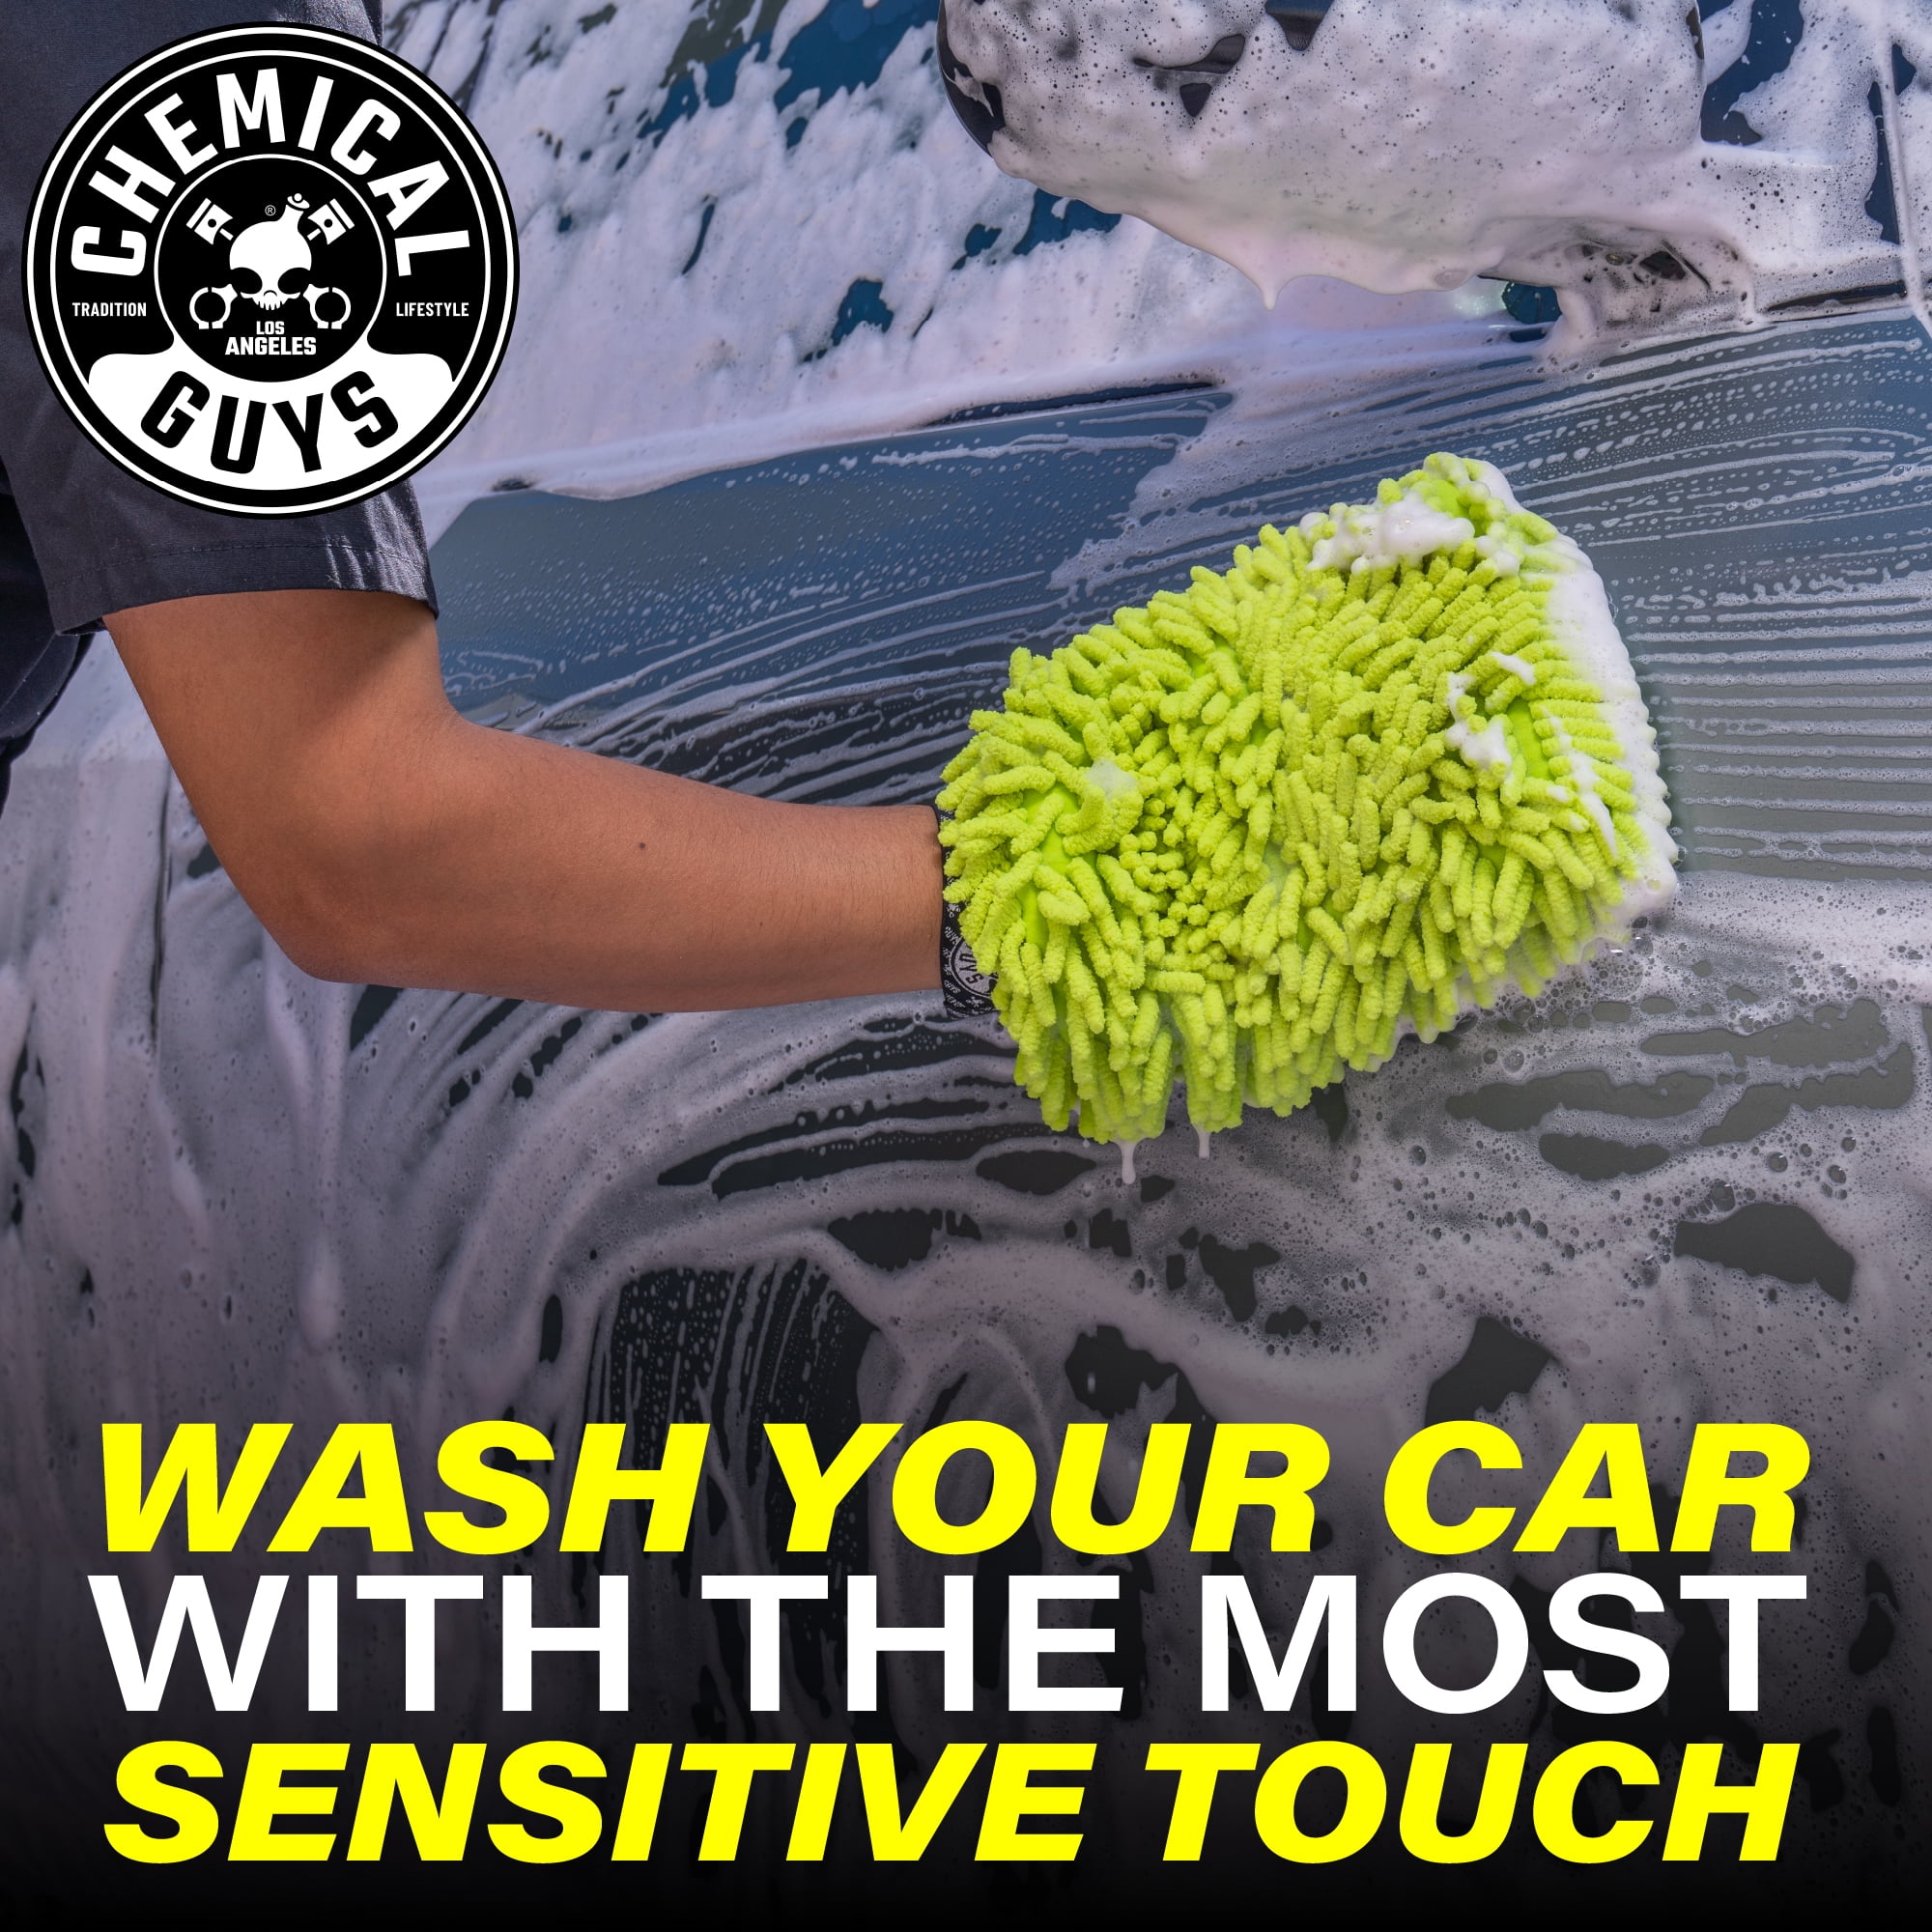 Chemical Guys Car Care Essentials Car Wash: Clean & Shine Kit, 4 pk, Cleans Your Interior & Exterior, HOL385